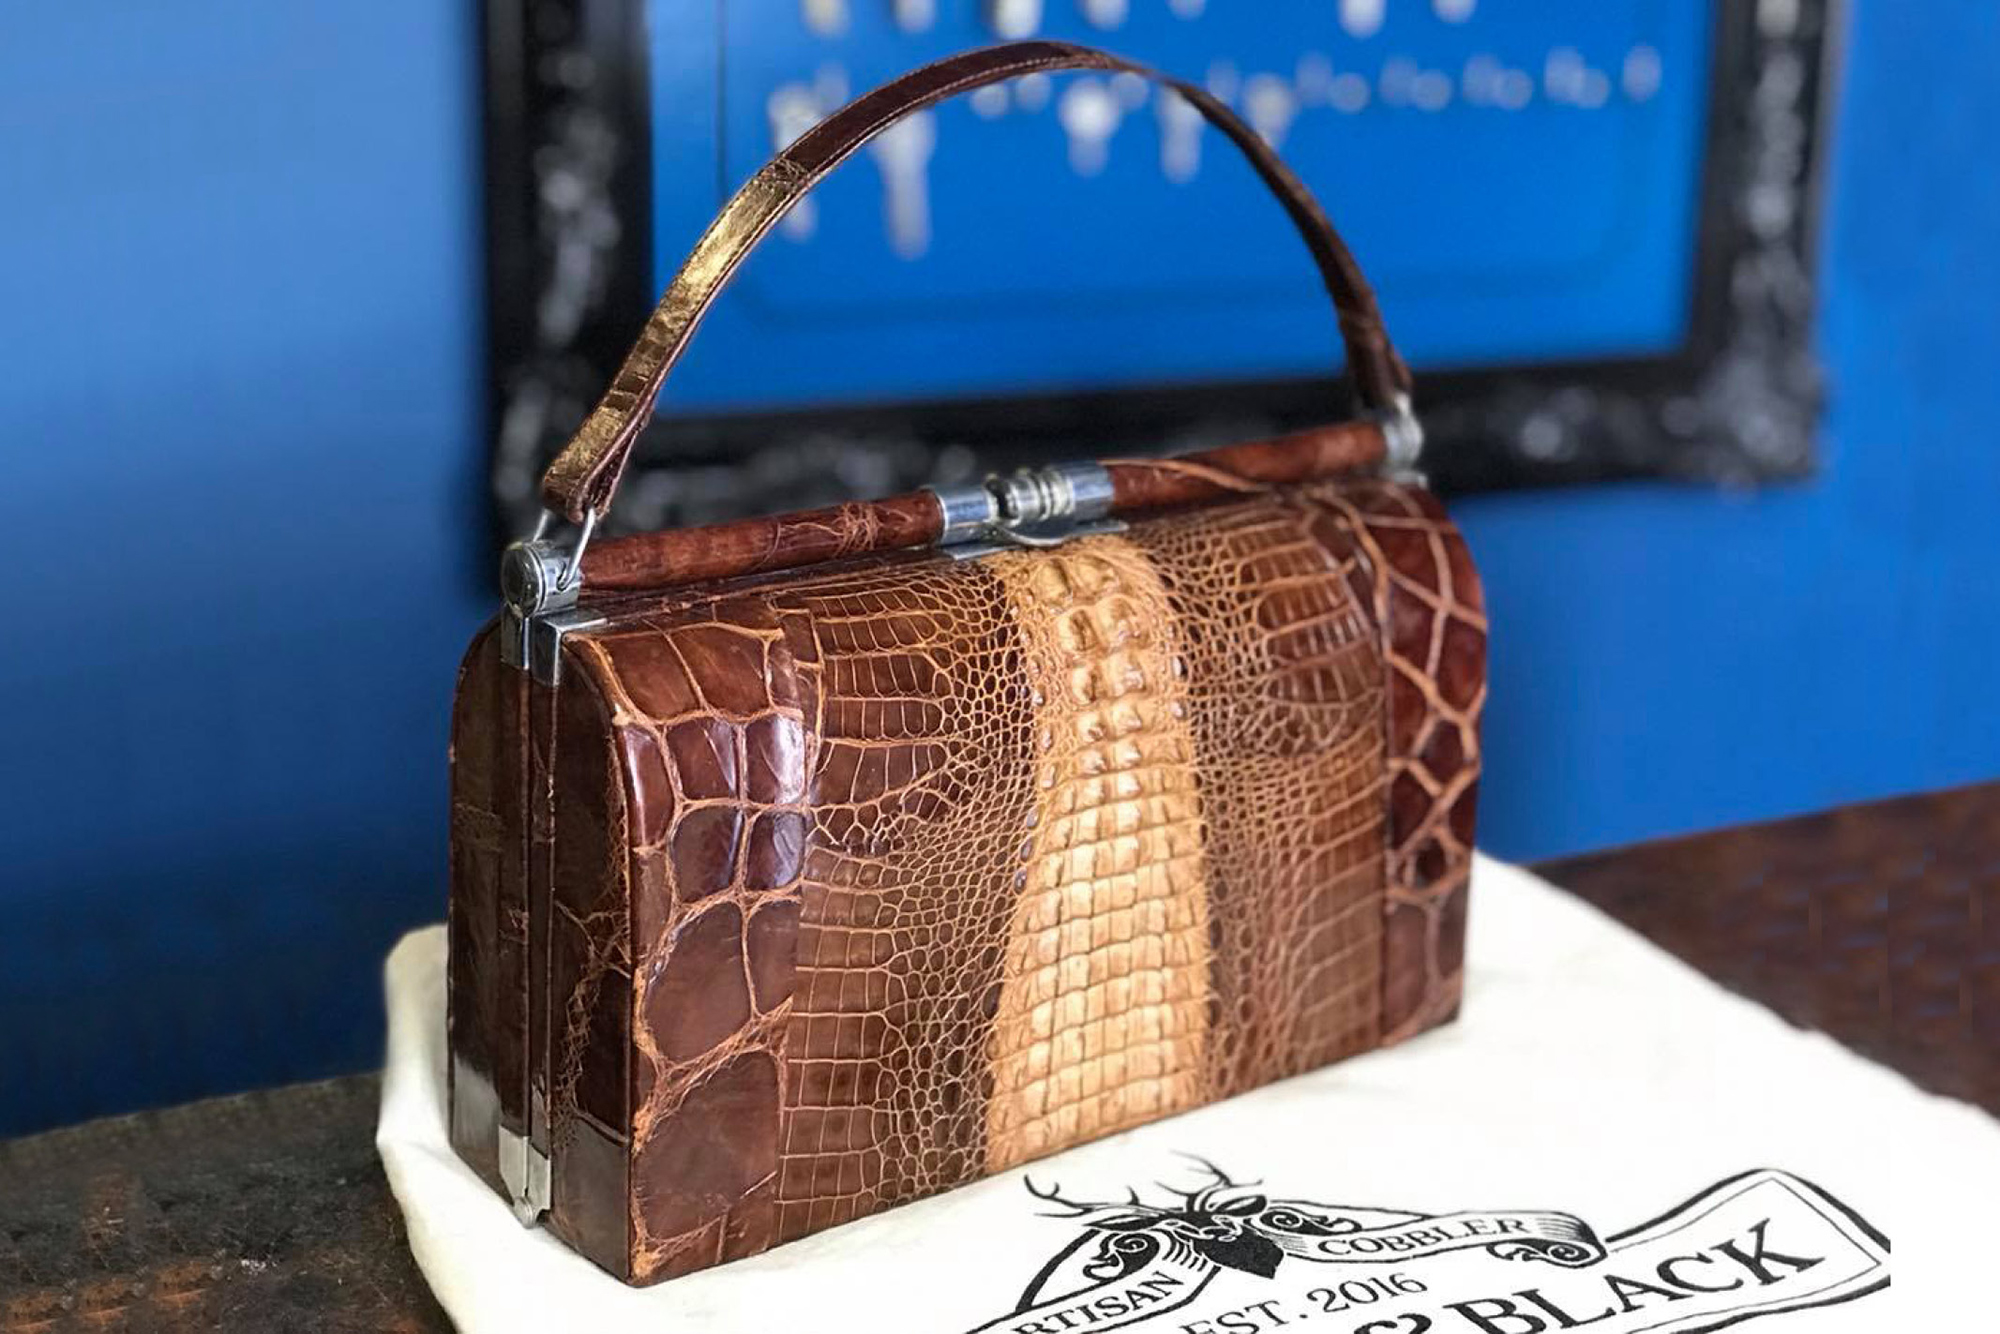 Buy KONAIN Women Leather Crossbody Bag - Genuine Cow Leather Purse -  Crocodile Embossed Design - Hand Stitched Crossbody Bag for Women -  Fashionable & Affordable Travel Bag at Amazon.in